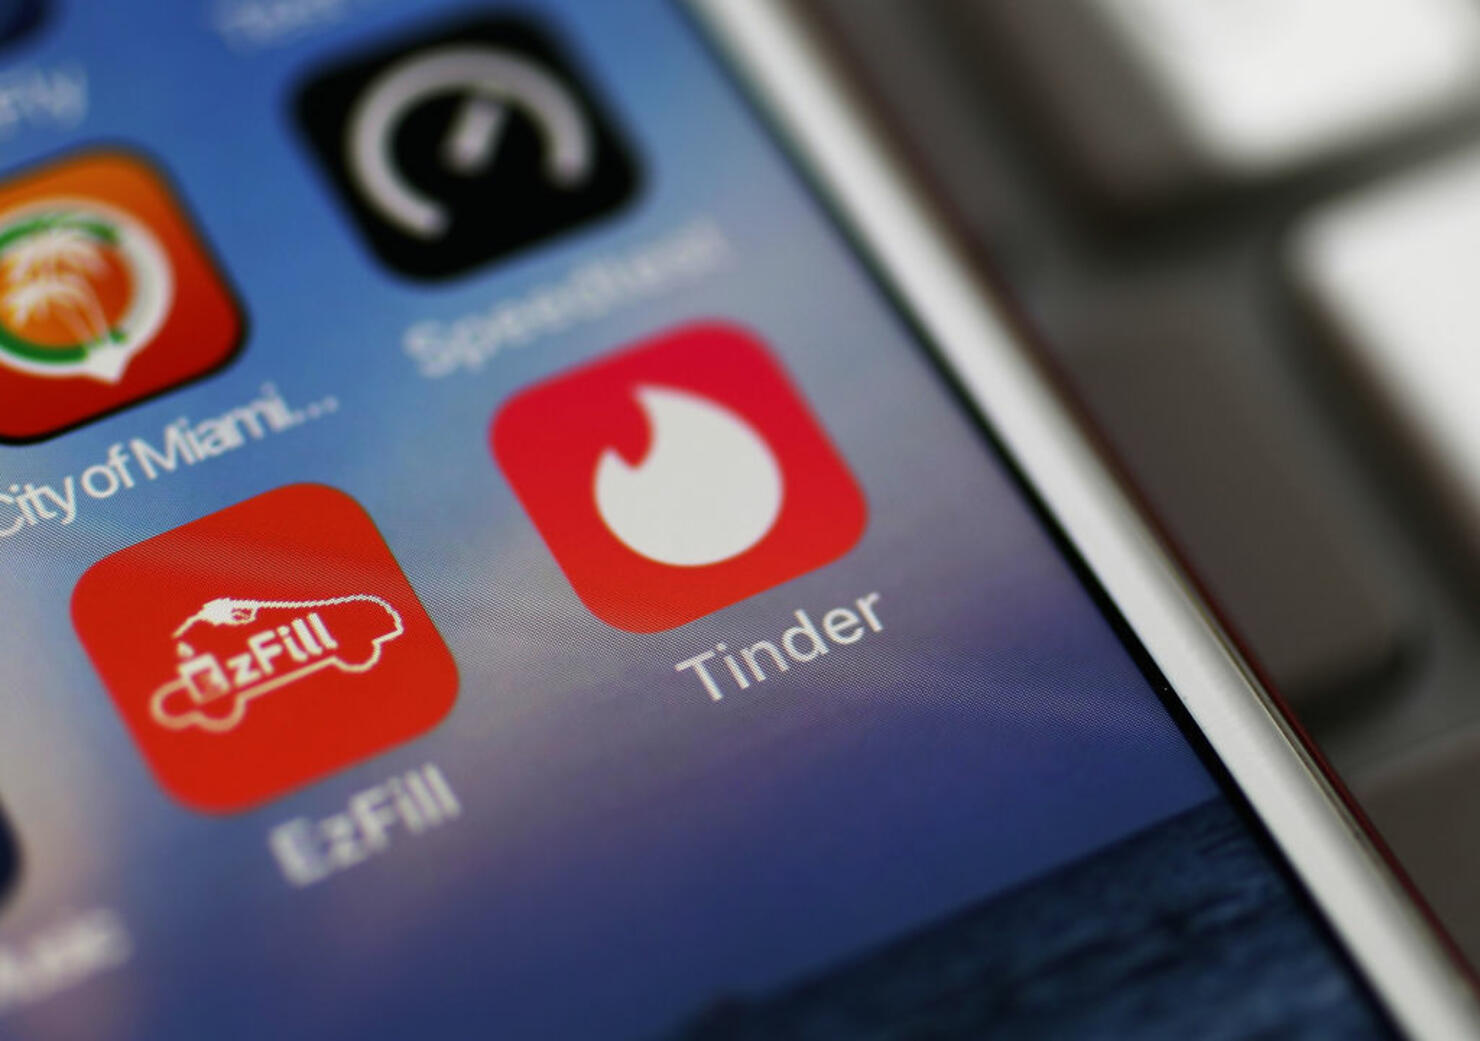 Tinder Introduces Tool to Verify Users' Heights on App iHeart